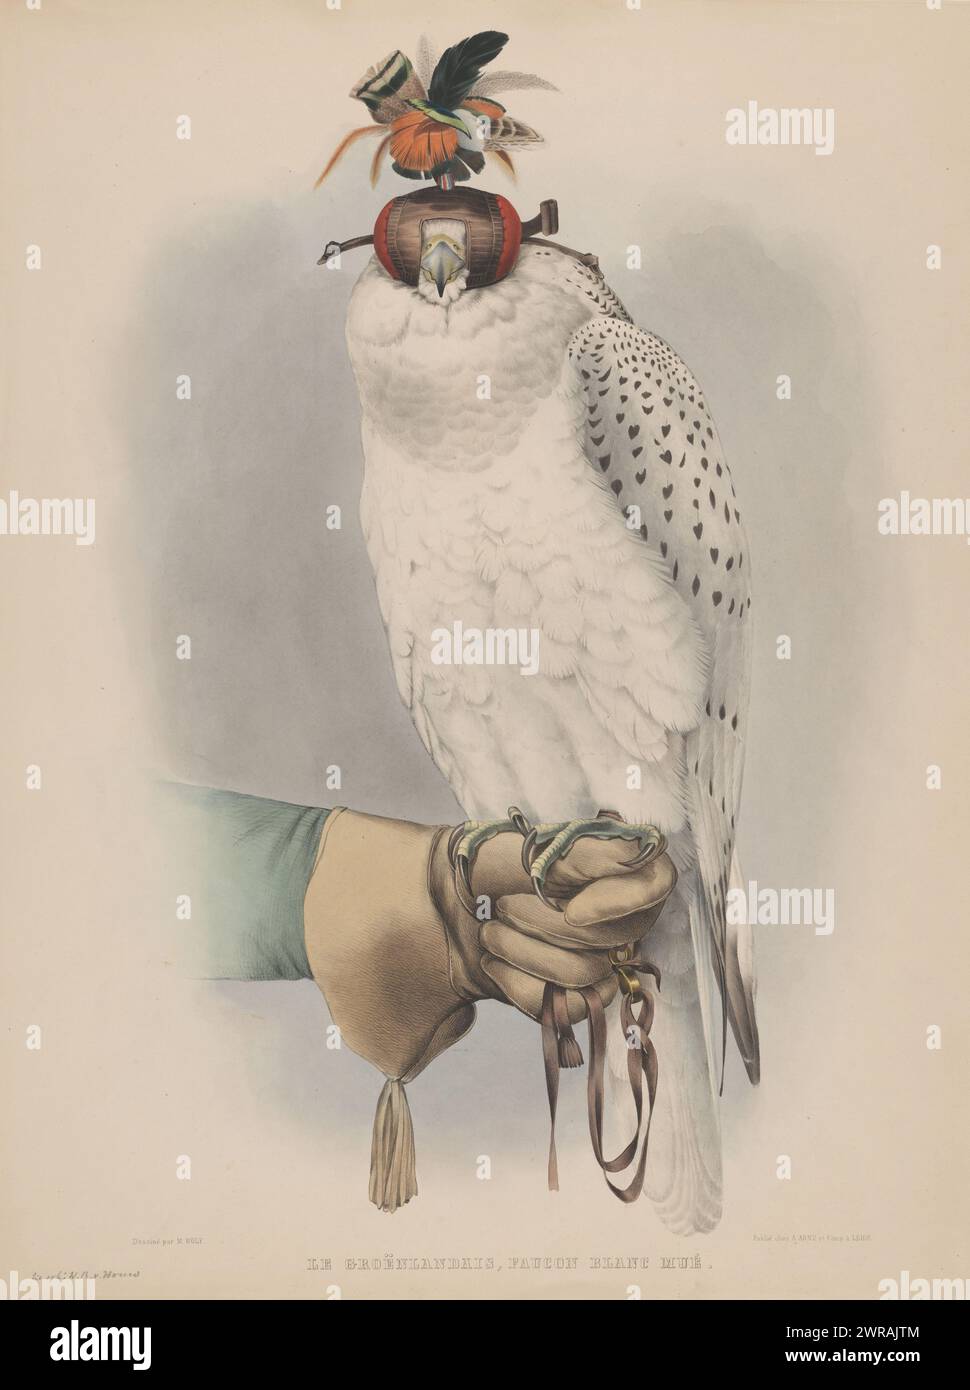 White Greenland falcon, Le groënlandais, faucon blanc musée (title on object), White Greenland falcon with hood, sitting on a hand with a glove., print maker: Willem Bastiaan van Wouw, (possibly), after design by: Joseph Wolf, publisher: August Arnz & Co., Leiden, in or before 1844 - 1853, paper, height 654 mm × width 499 mm, print Stock Photo